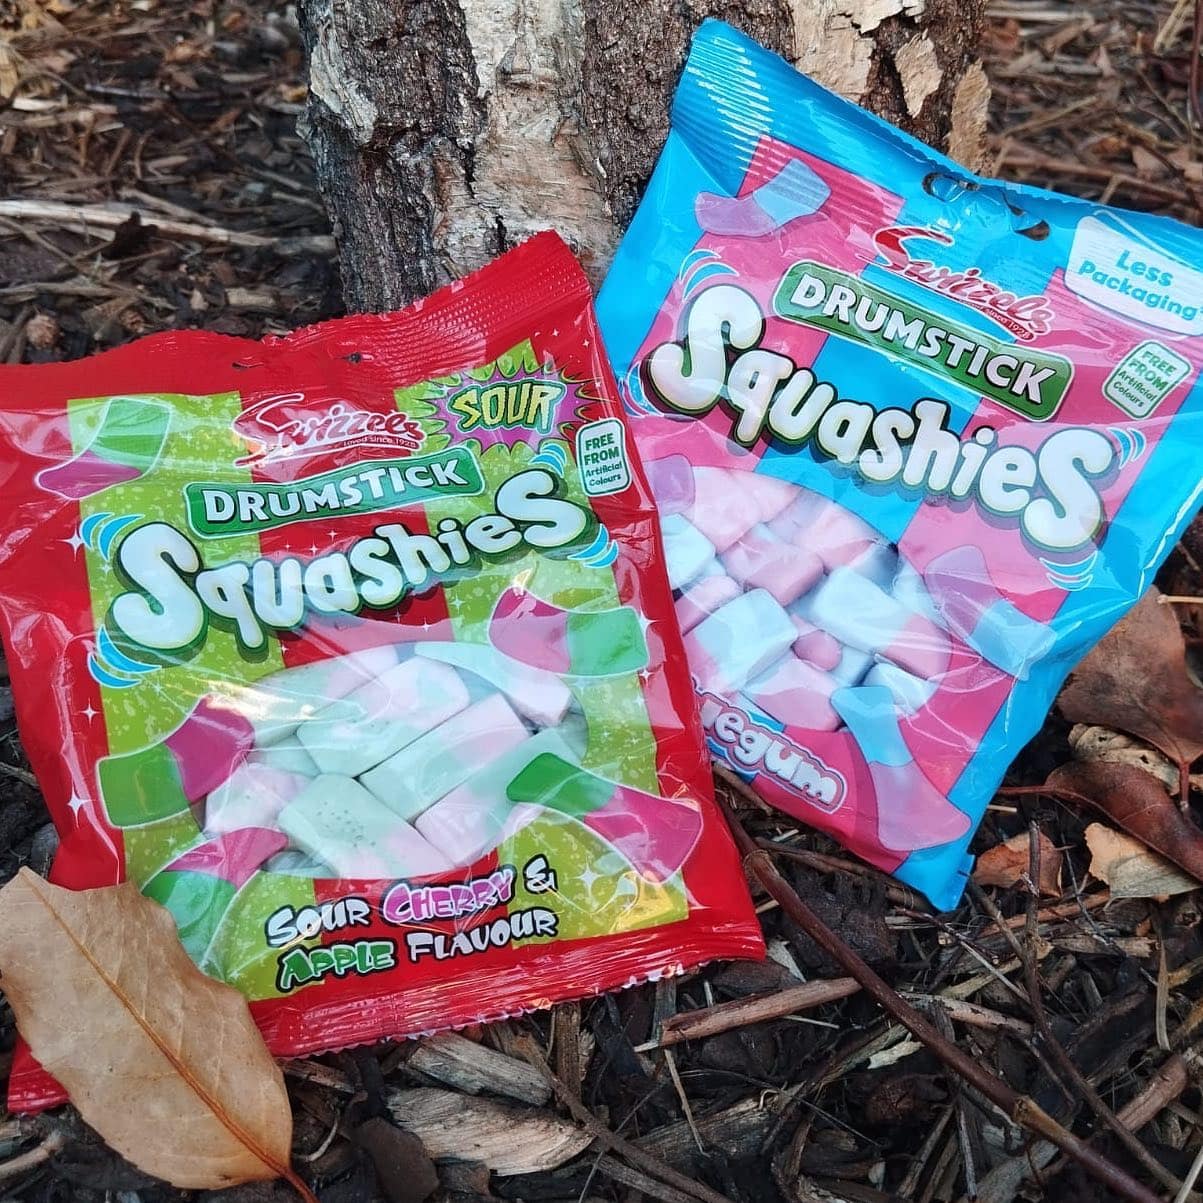 We hope you’re really enjoying the @swizzels_sweets in your goody bag! Swizzels have been making ...